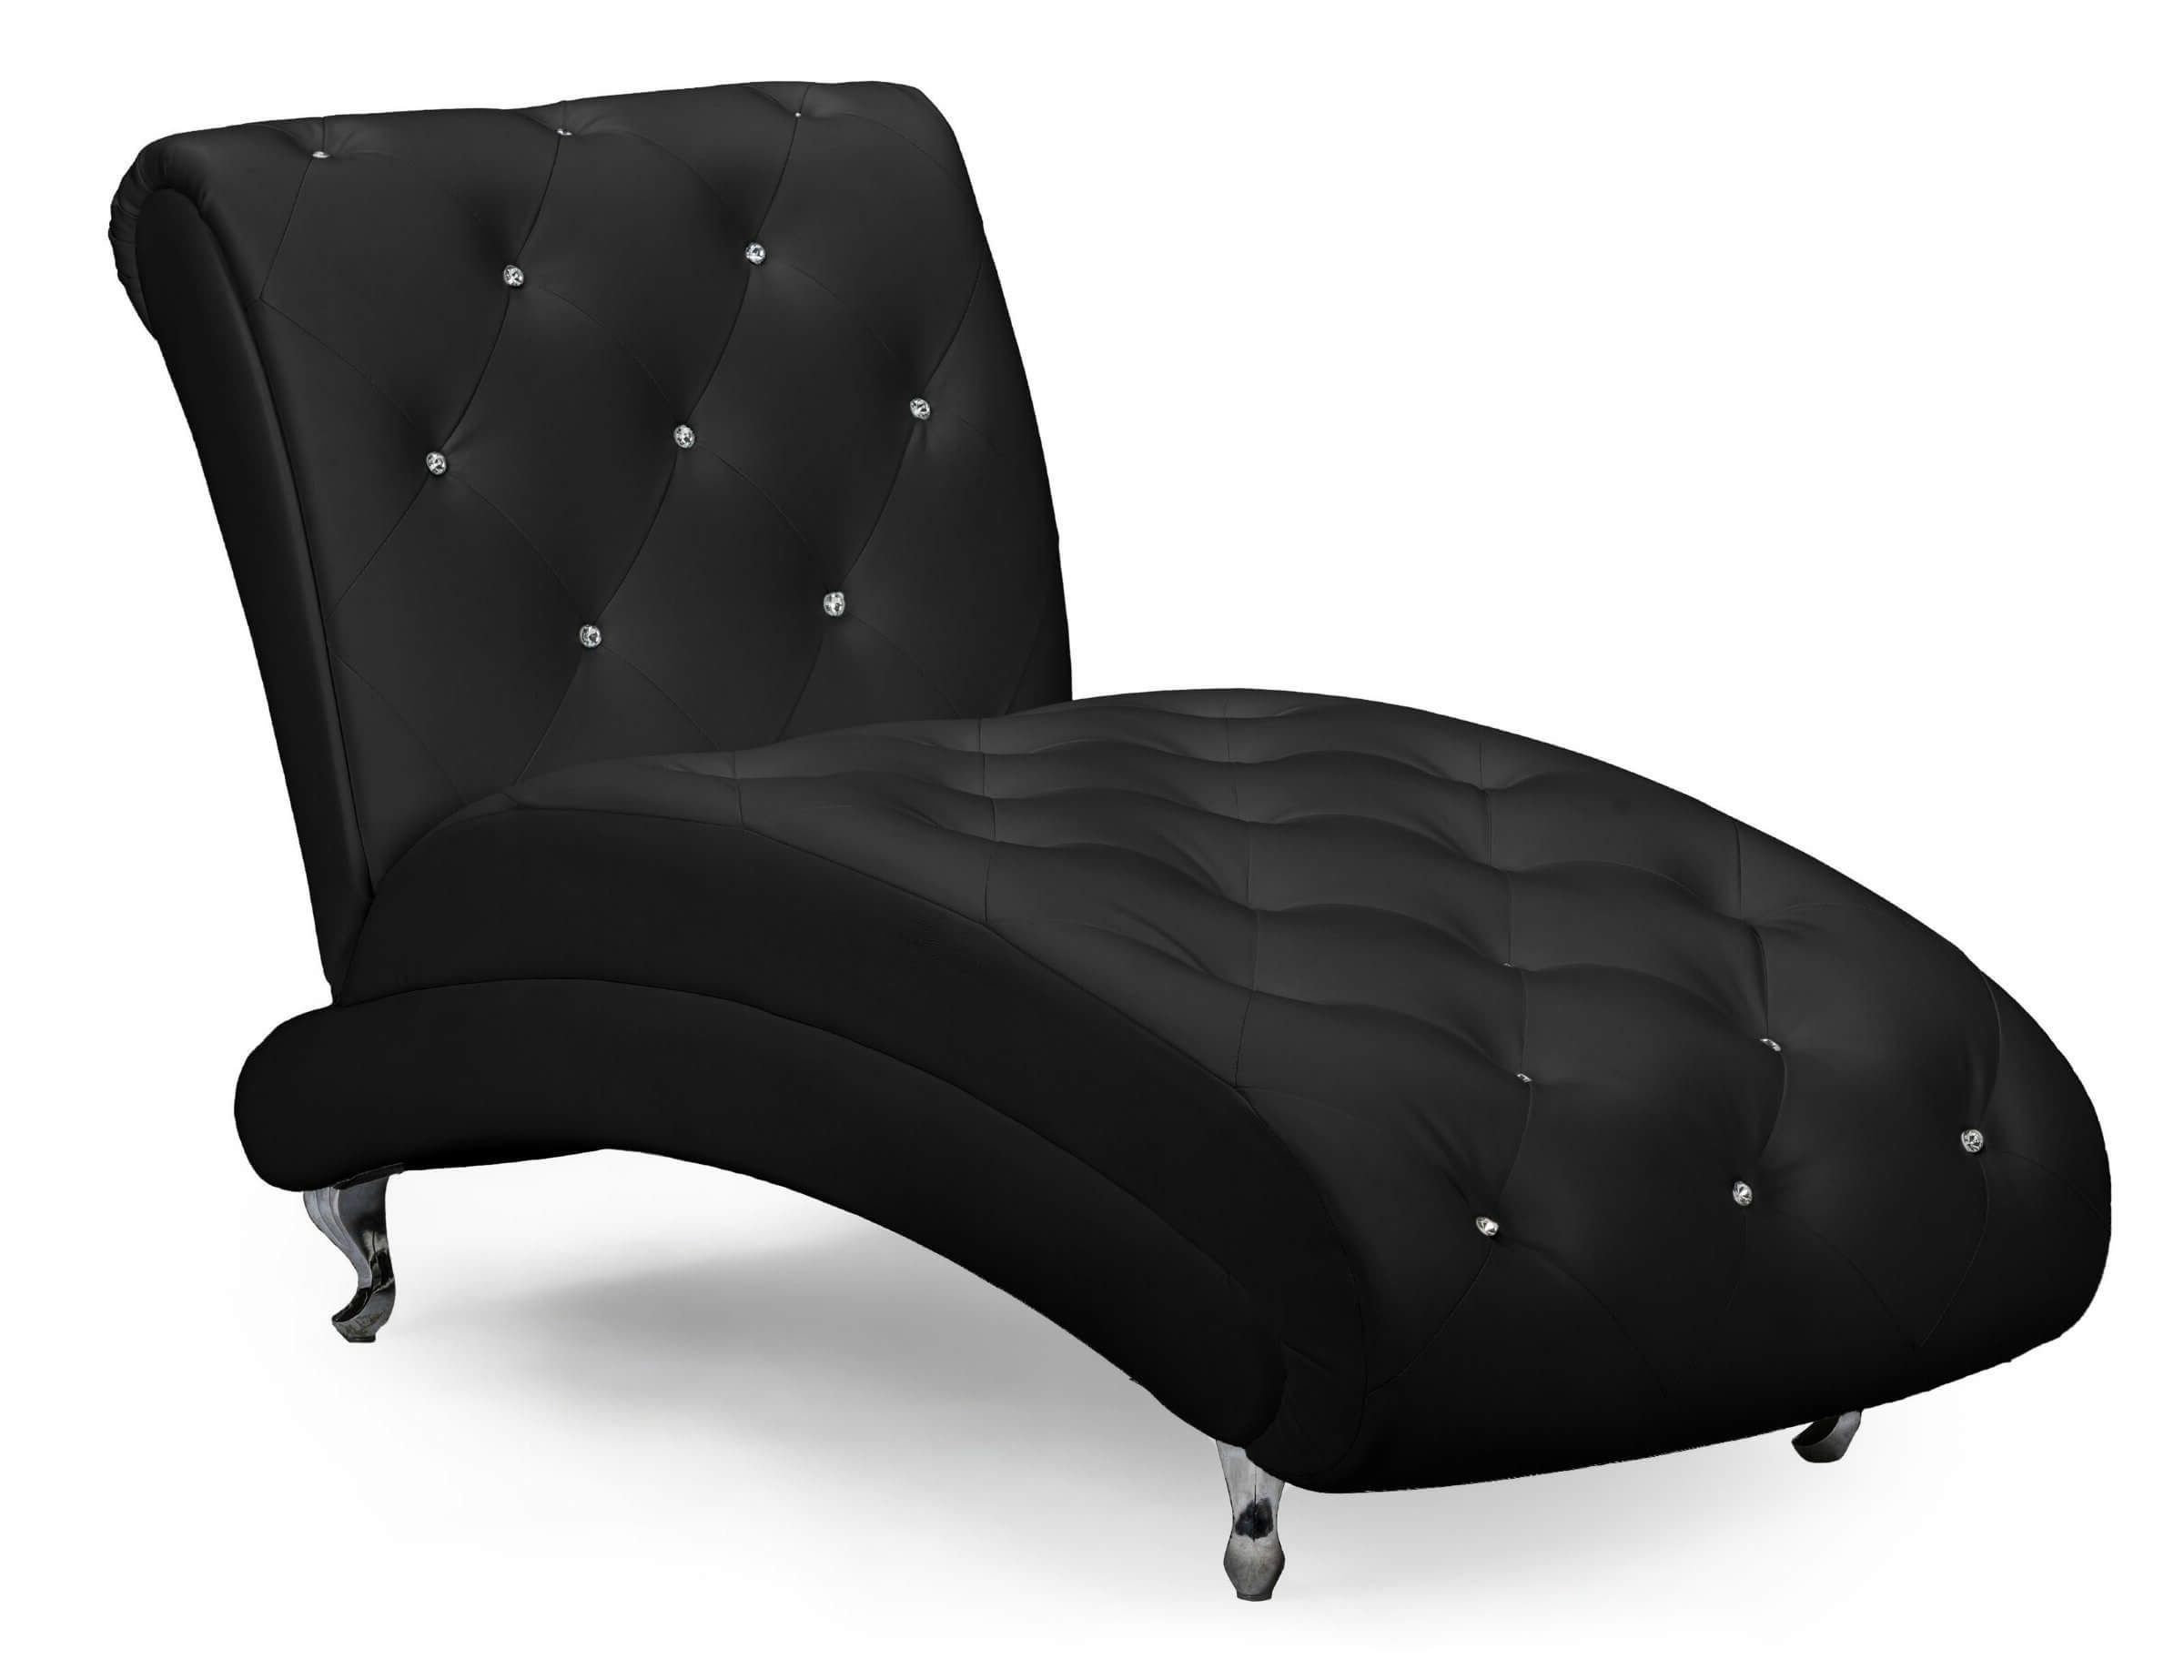 Best And Newest Alessia Chaise Lounge Tufted Chairs Regarding Alessia Chaise Lounge Chair Tufted (View 4 of 15)